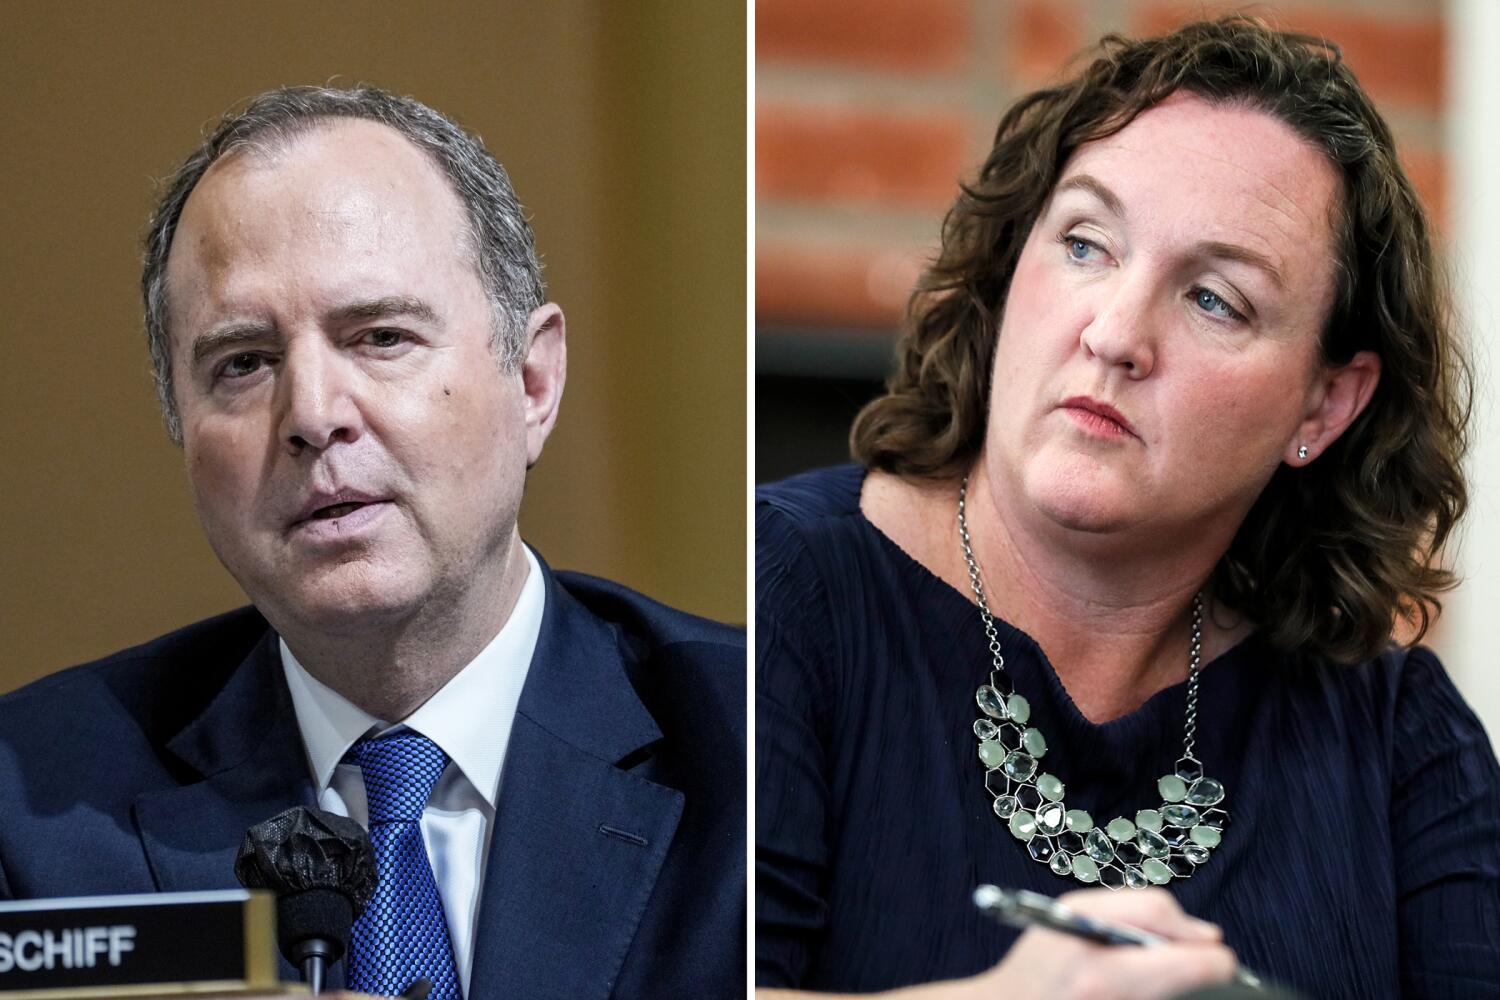 Katie Porter could be a major threat to Adam Schiff in November. But she's running out of time